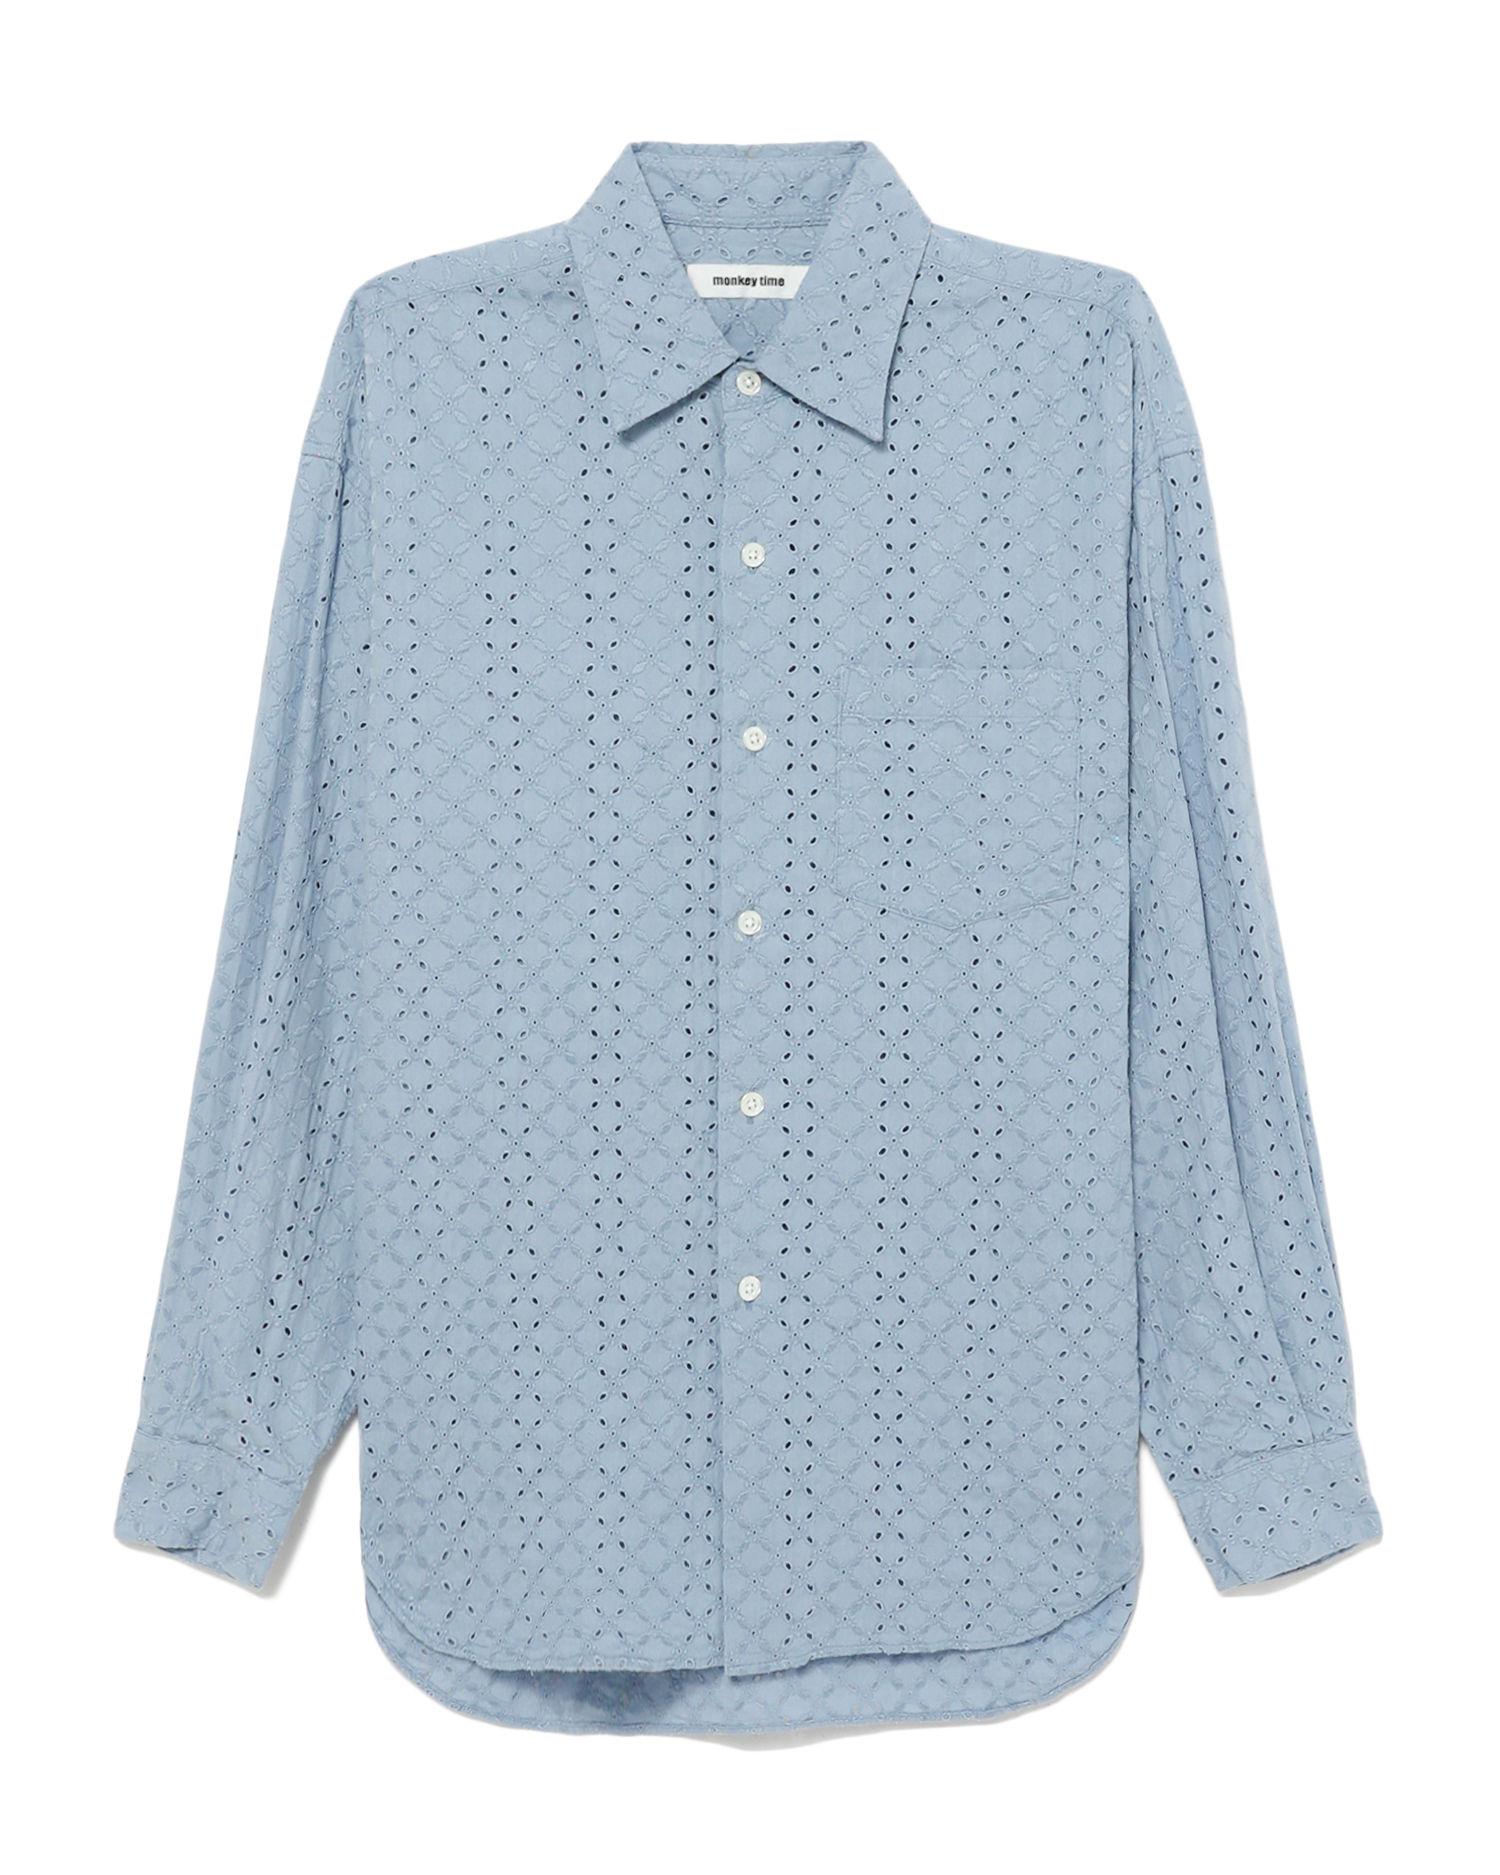 Relaxed patterned shirt by BEAUTY&YOUTH MONKEY TIME